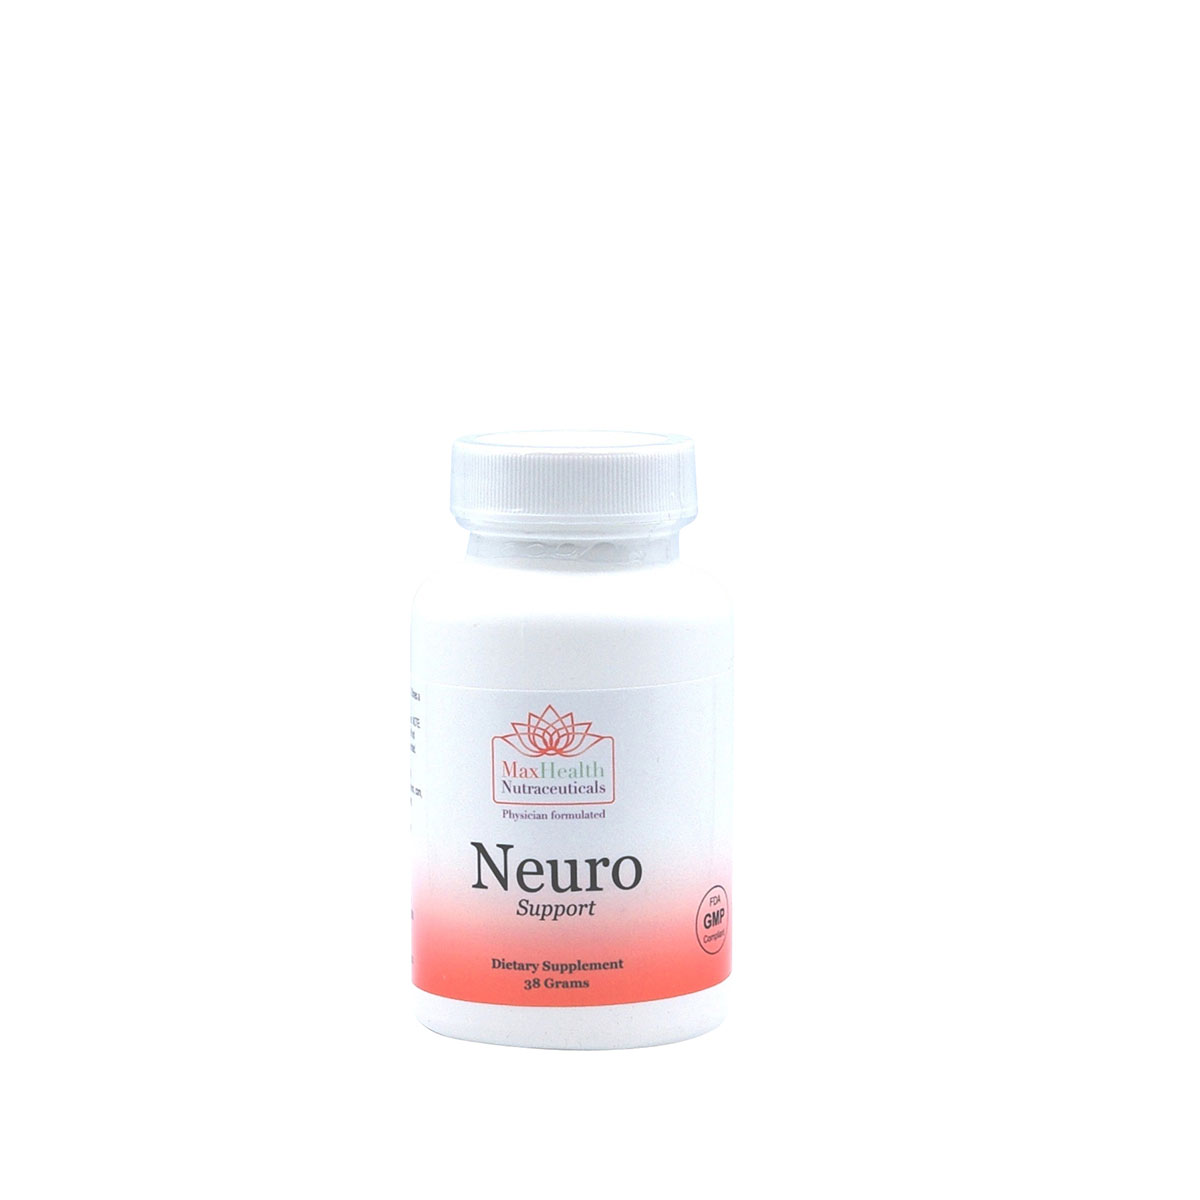 Neuro Support 38 Grams / 60 Servings